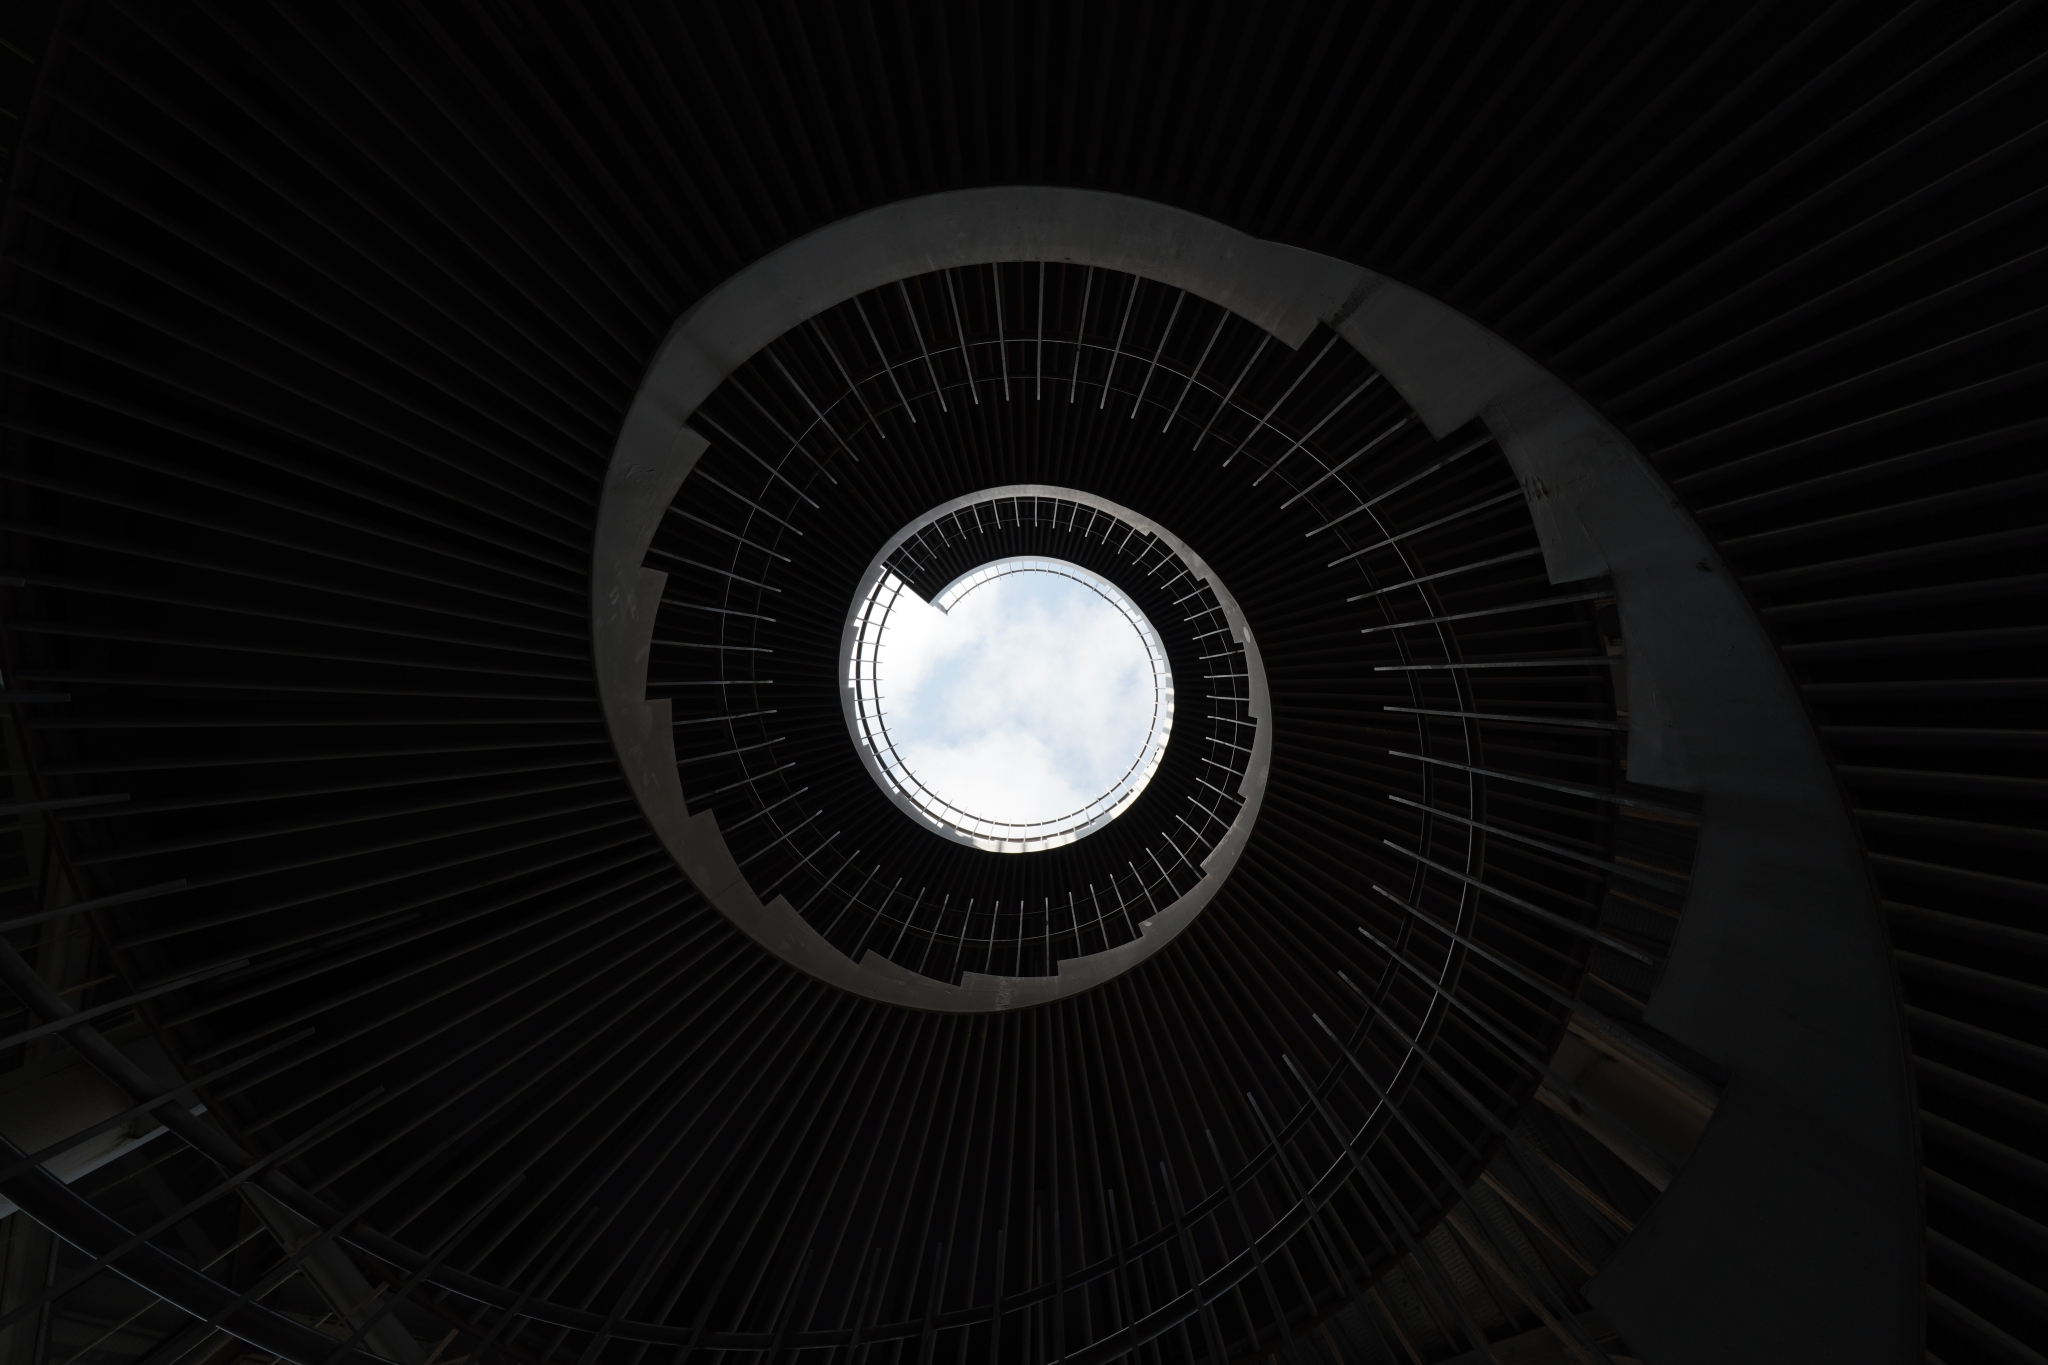 Upwards shot of a spiral staircase and a circle of sky